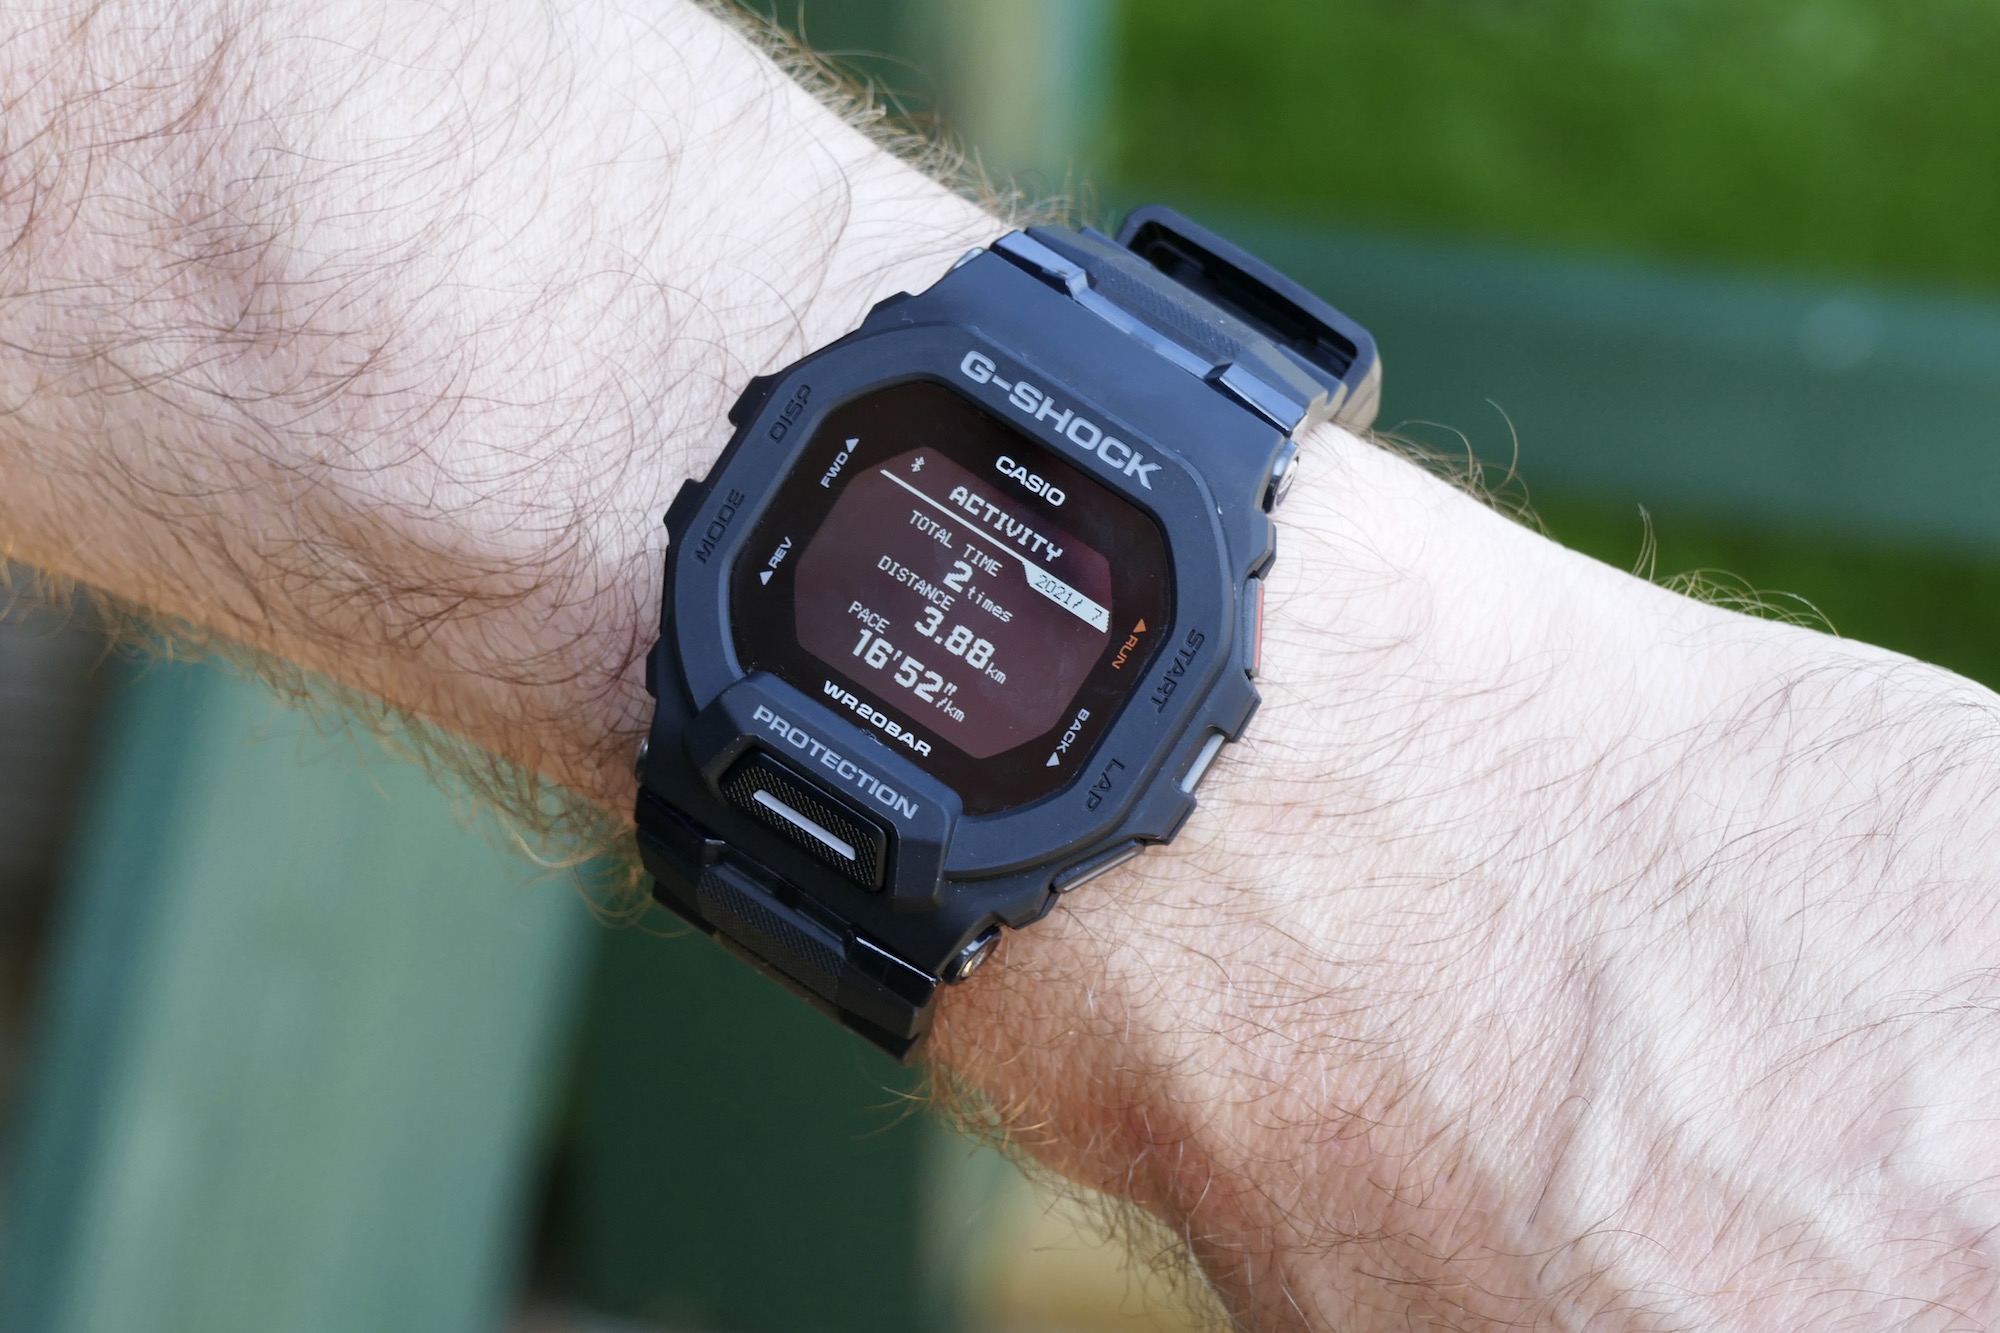 Activity screen on the Casio G-Shock GBD-200.